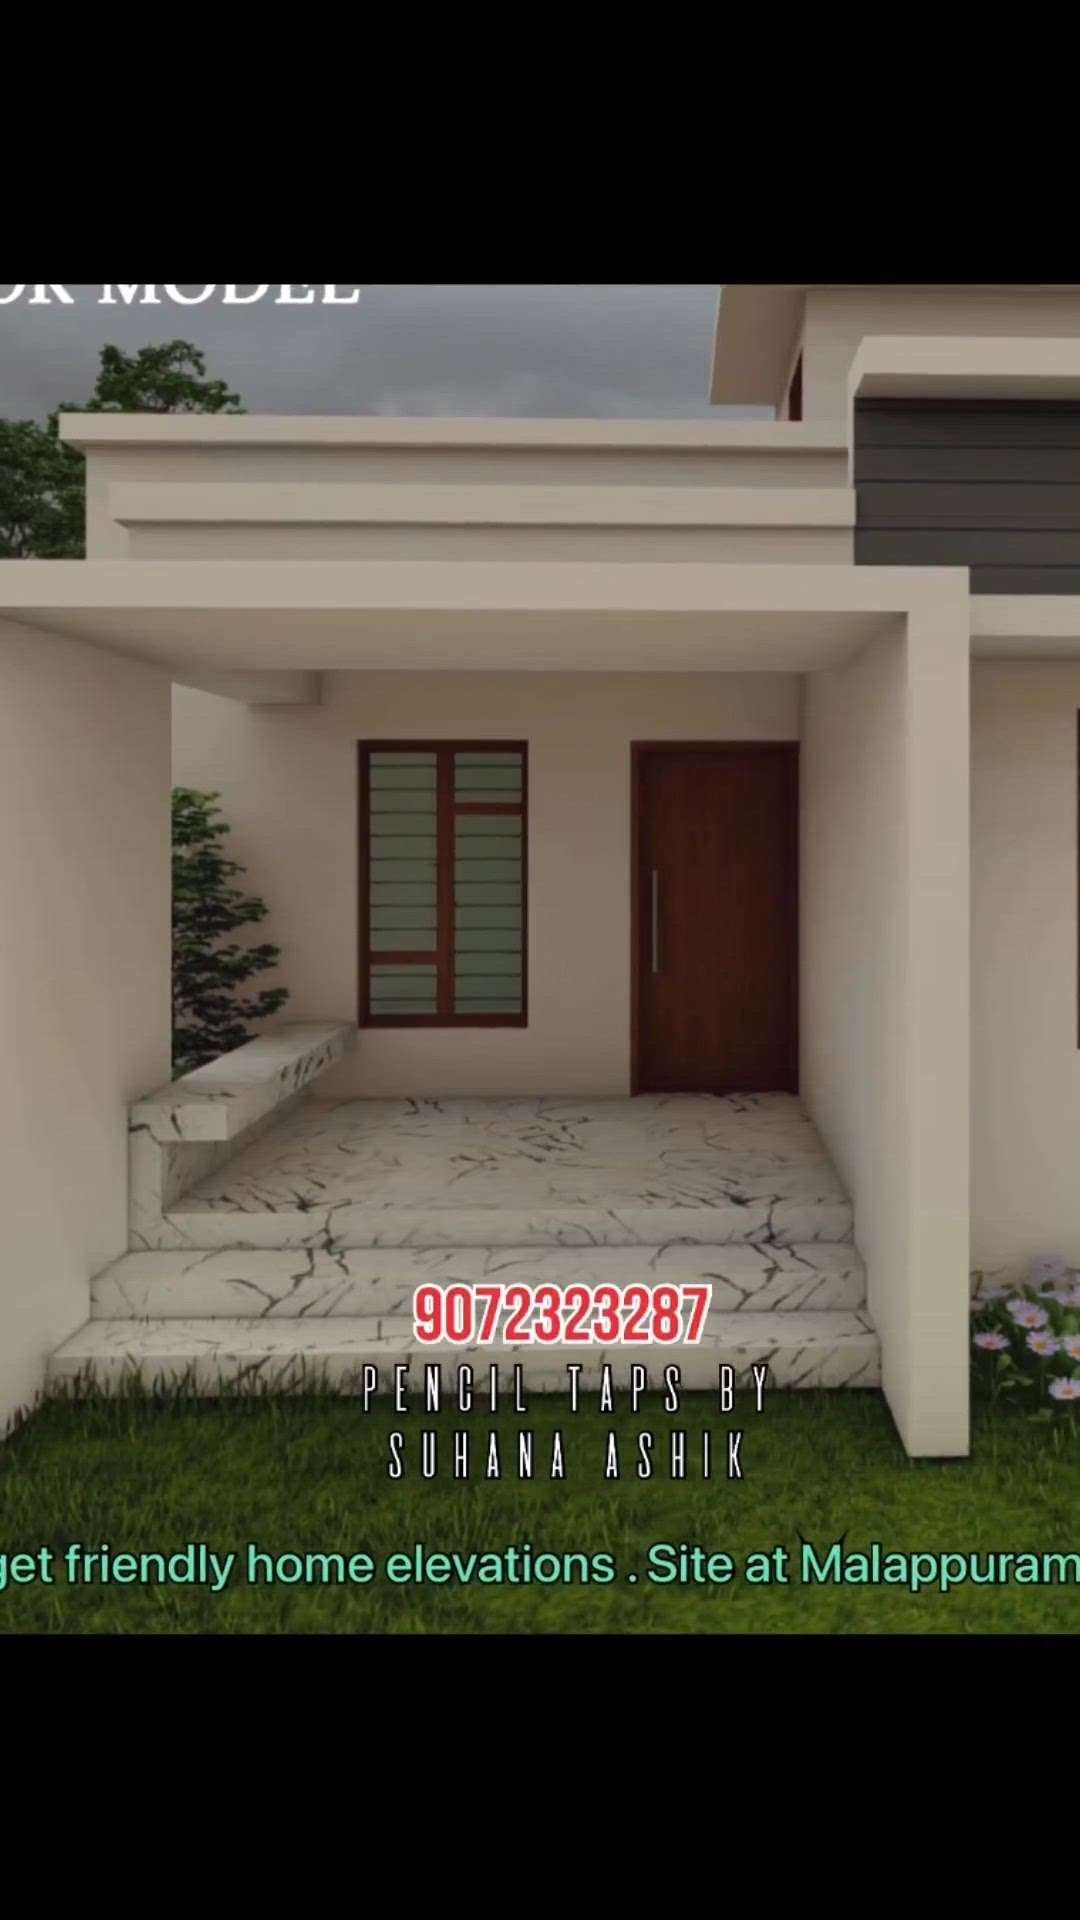 for more enquiries
9072323287

minimalistic home elevations
 #ElevationDesign #ElevationDesign #elevation_